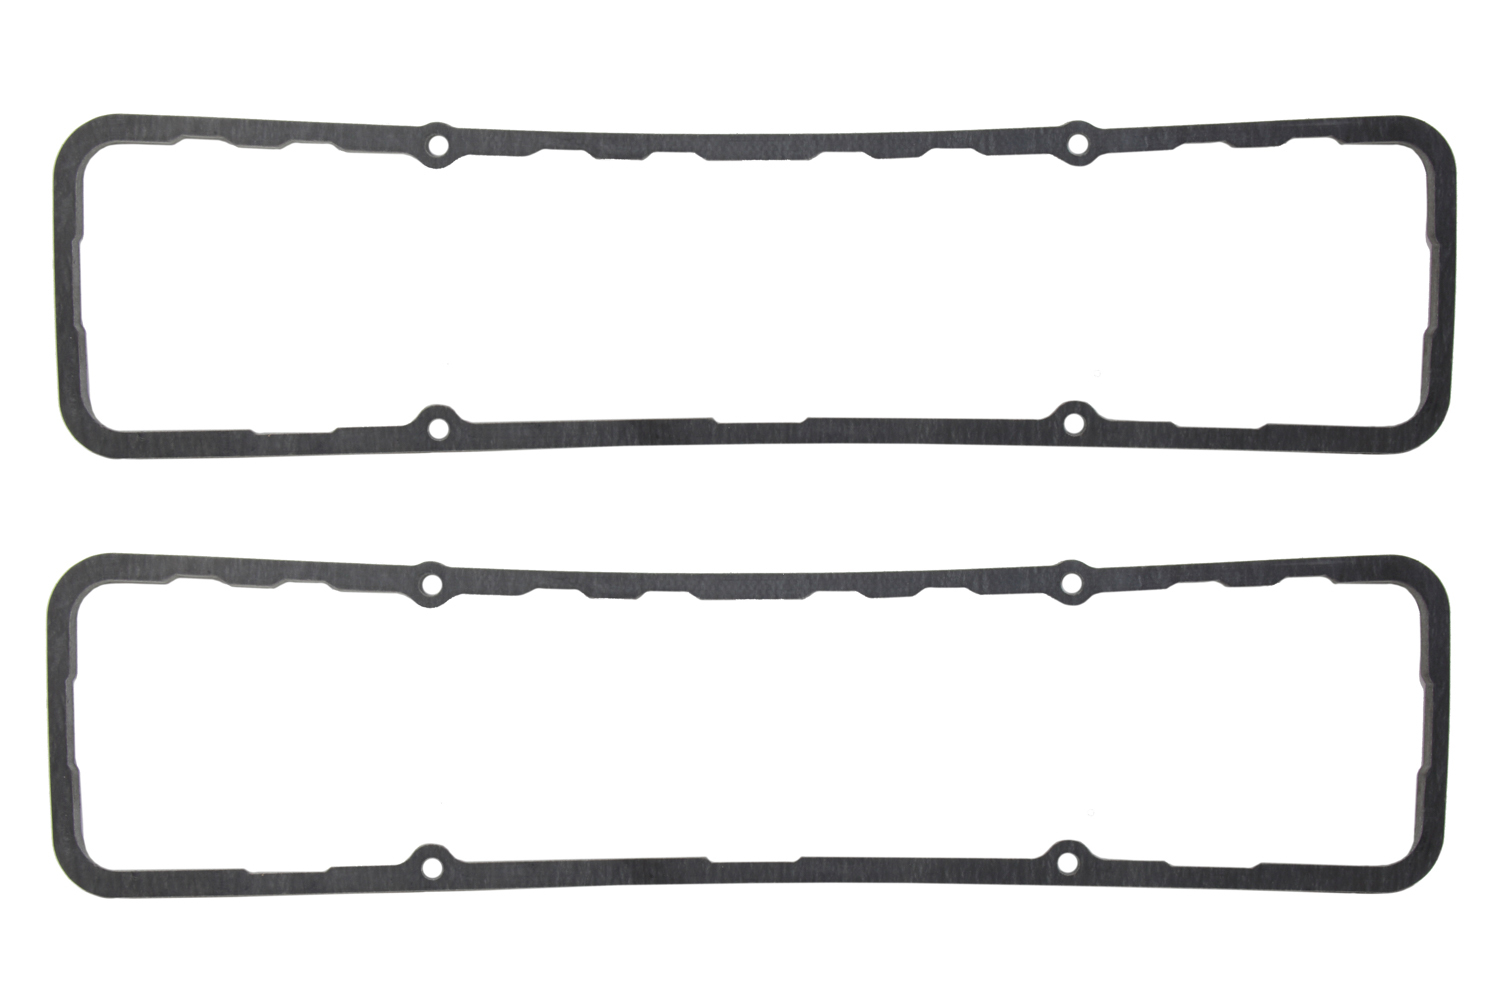 Cometic Gaskets C15613-188 Valve Cover Gasket, 0.188 in Thick, Fiber, 18 / 23 Degree Heads, Small Block Chevy, Pair